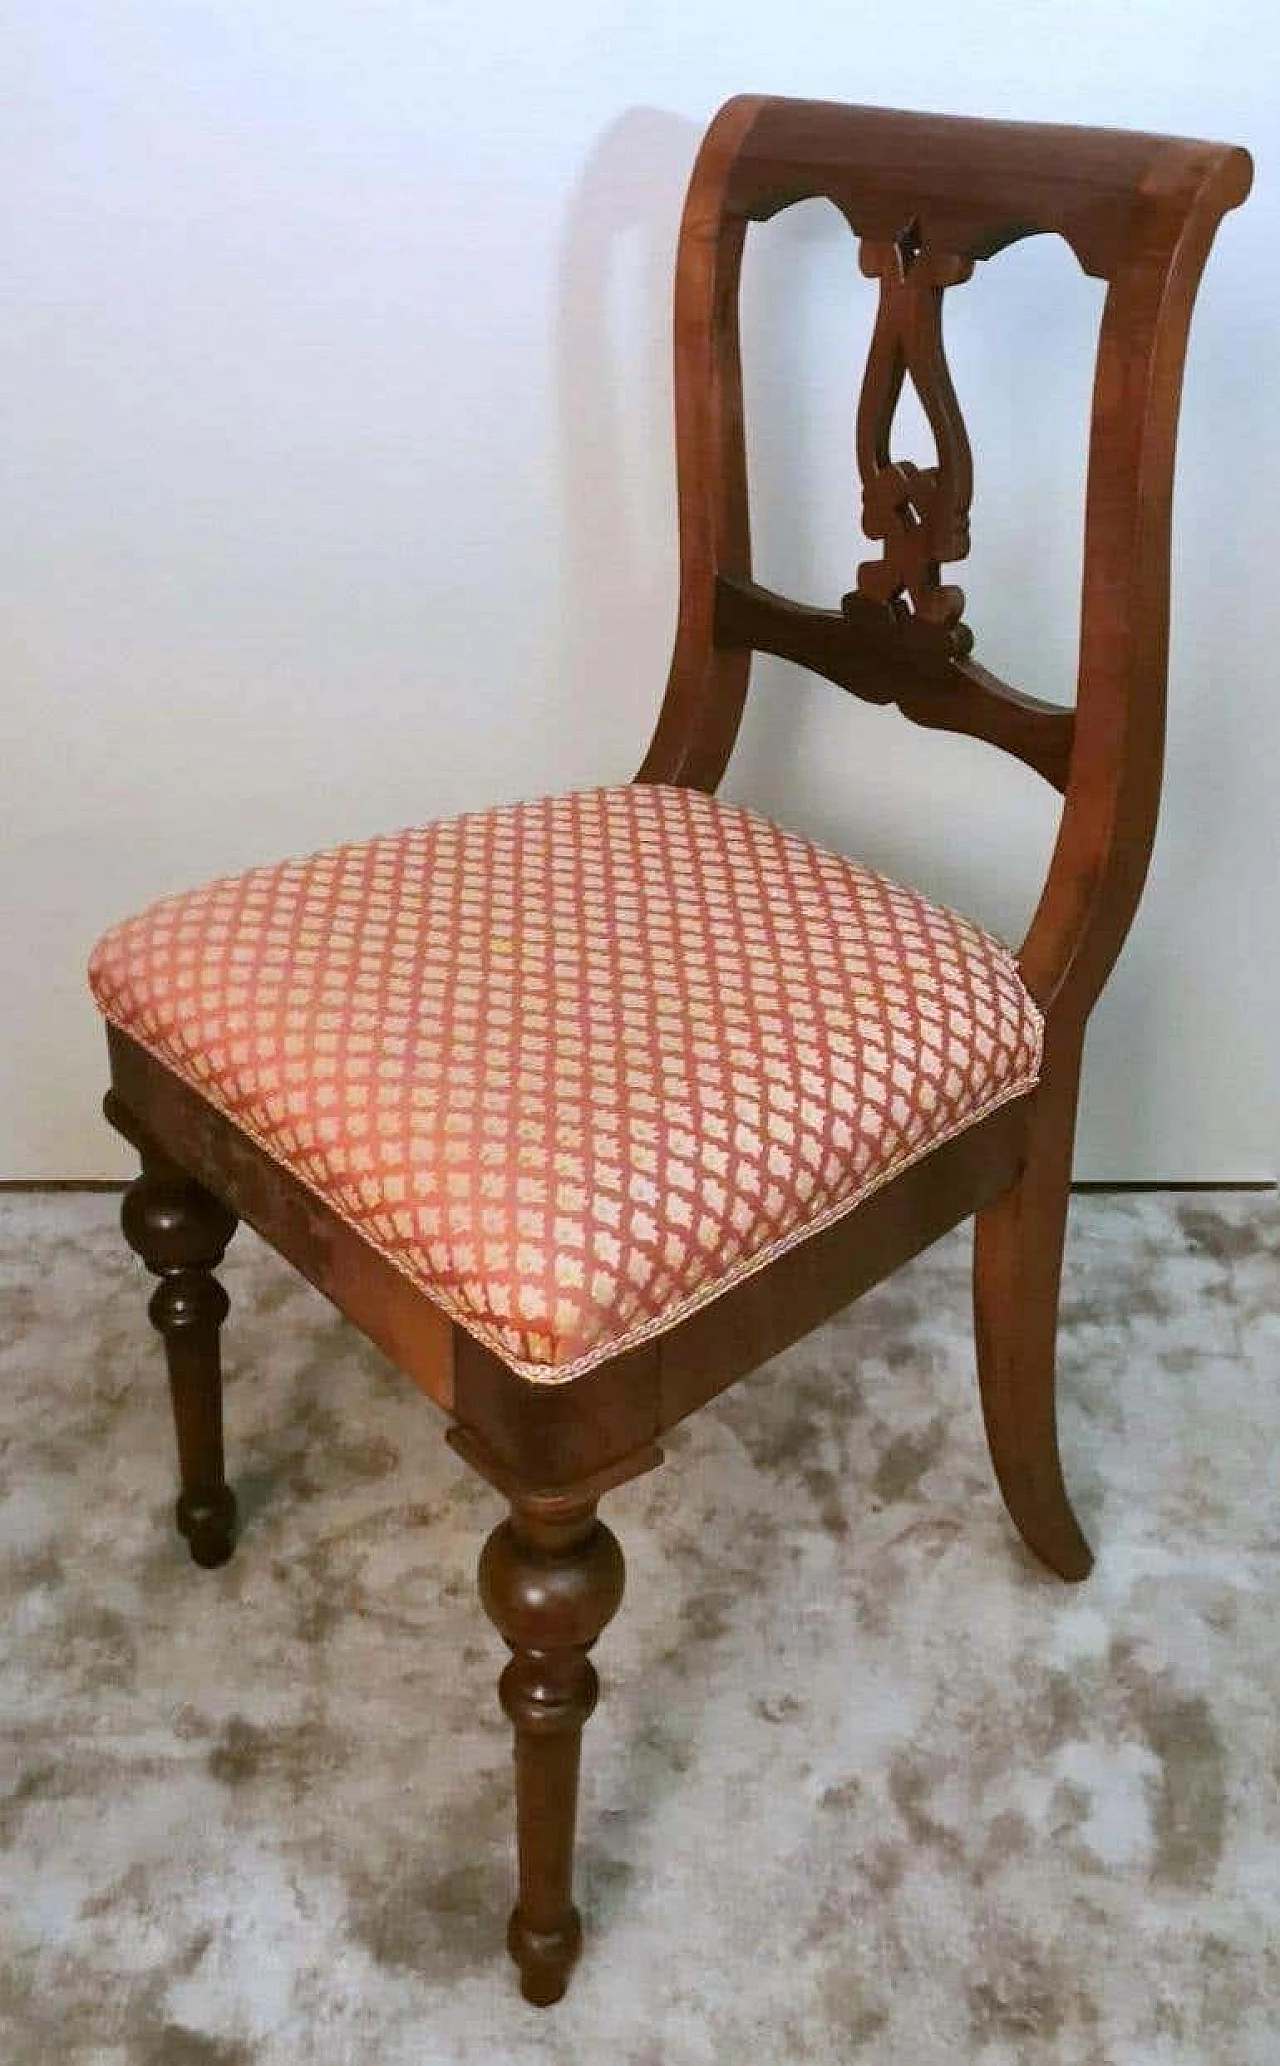 4 Biedermeier style wooden and fabric chairs, mid-19th century 11